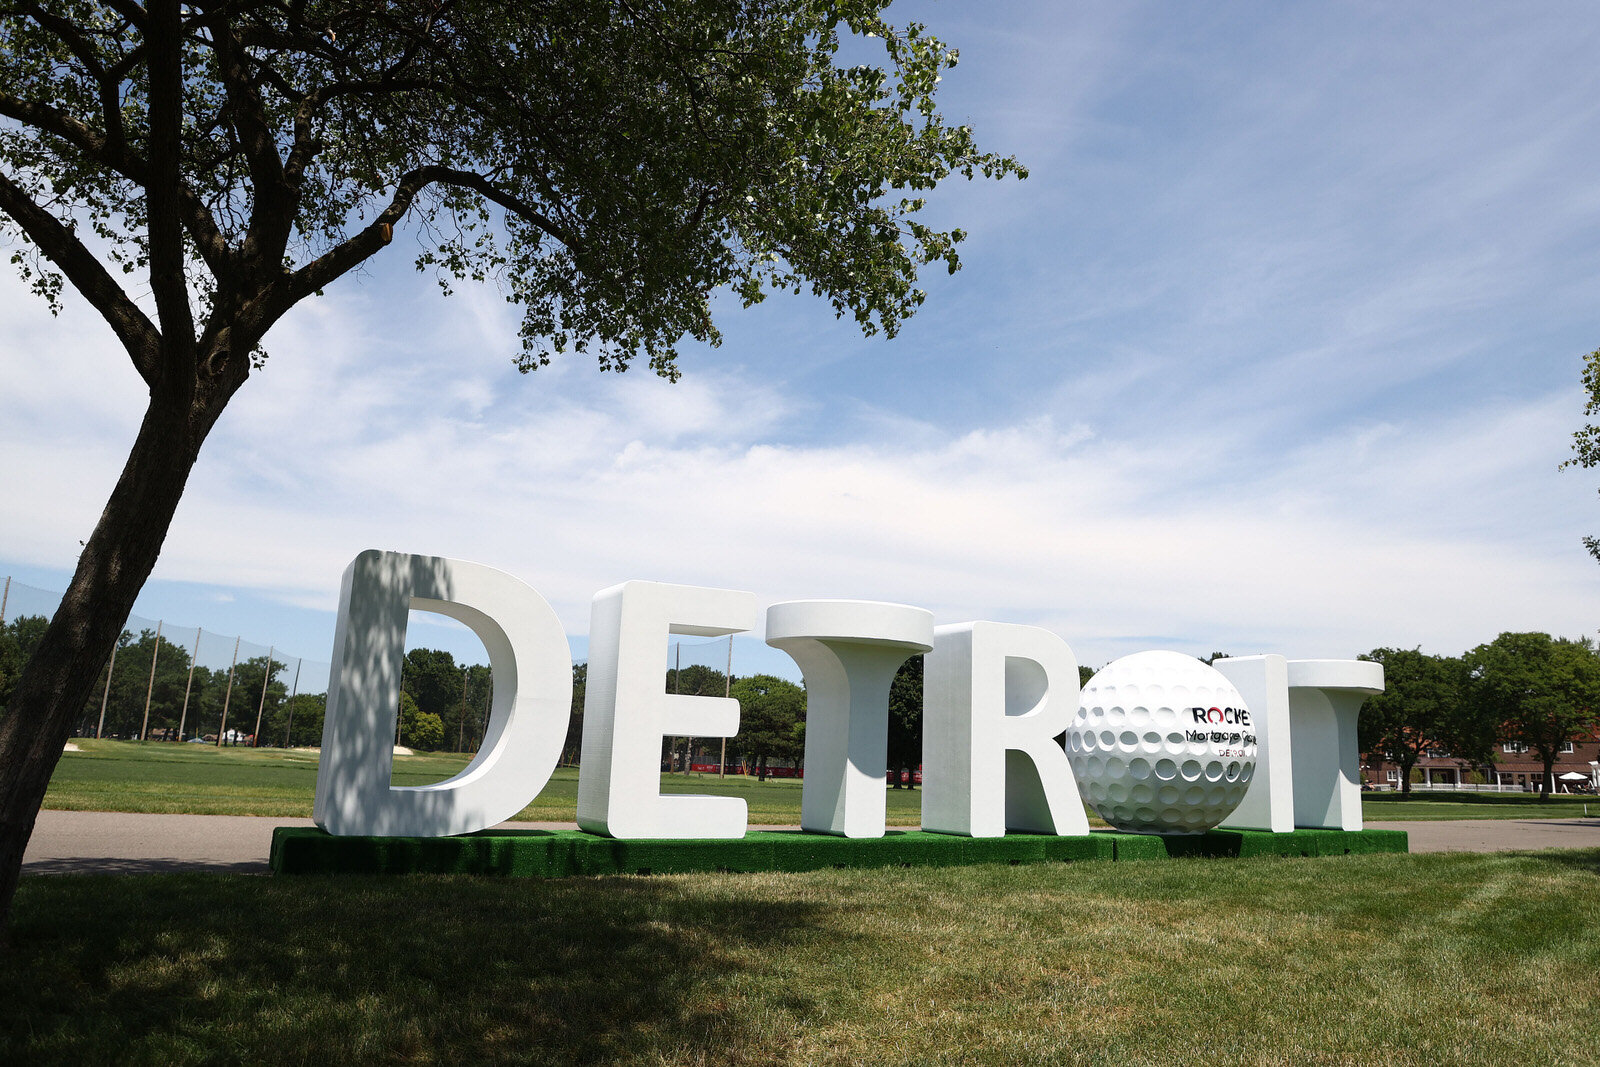  DETROIT, MICHIGAN - JULY 04: Signage is displayed during the third round of the Rocket Mortgage Classic on July 04, 2020 at the Detroit Golf Club in Detroit, Michigan. (Photo by Gregory Shamus/Getty Images) 